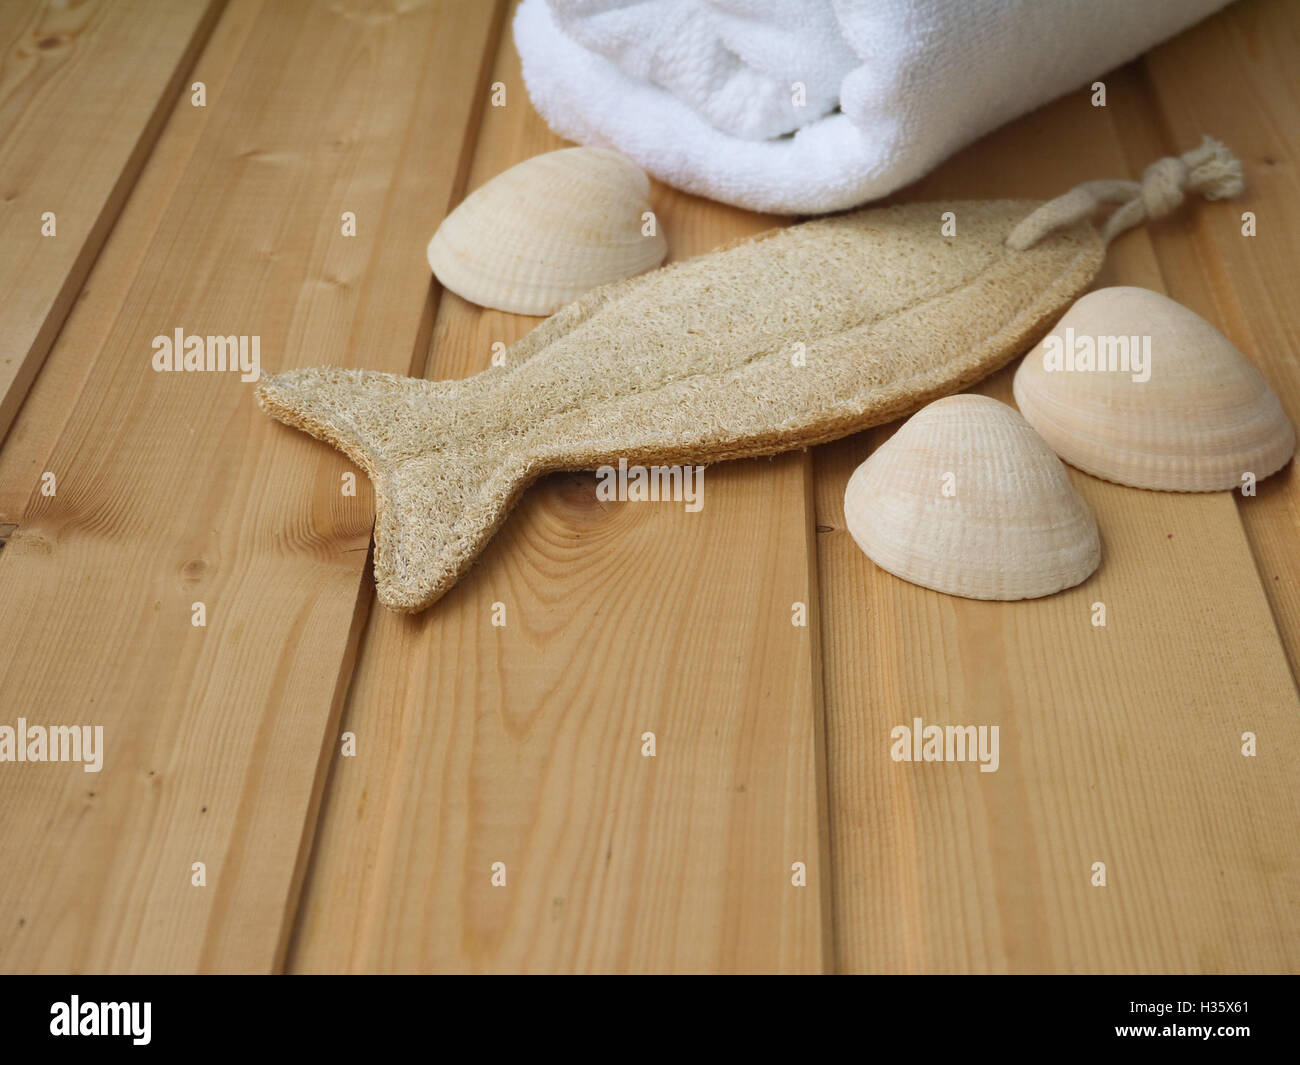 Towel,shells and luffa wisp on the wooden background Stock Photo